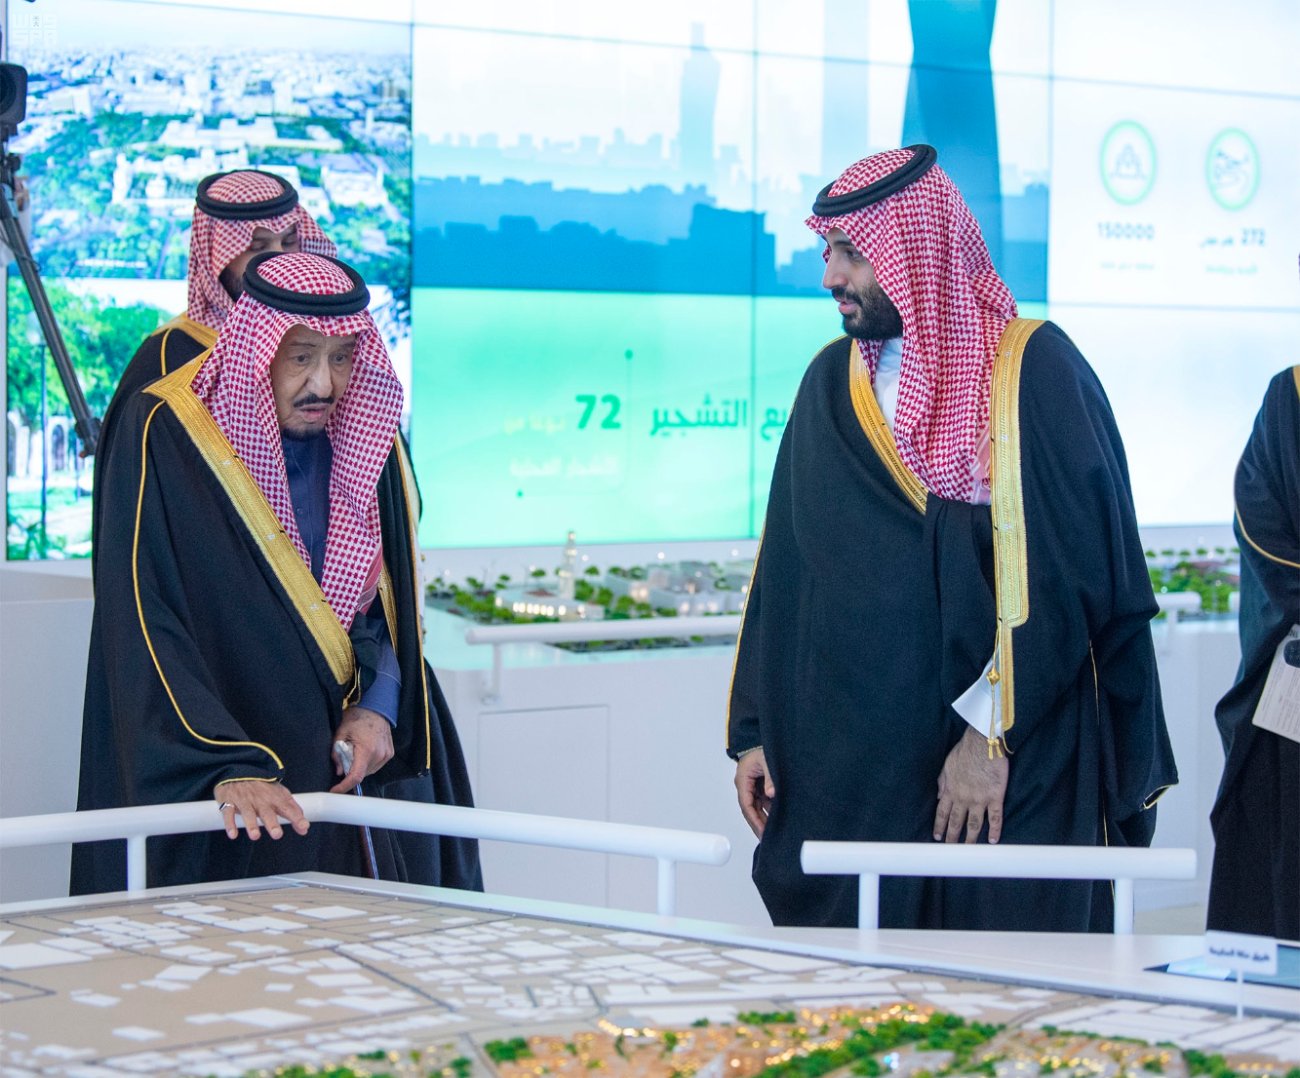 When completed, Riyadh's green coverage will increase from 1.5 percent of Riyadh’s total area to 9.1 percent, according to Arab News.